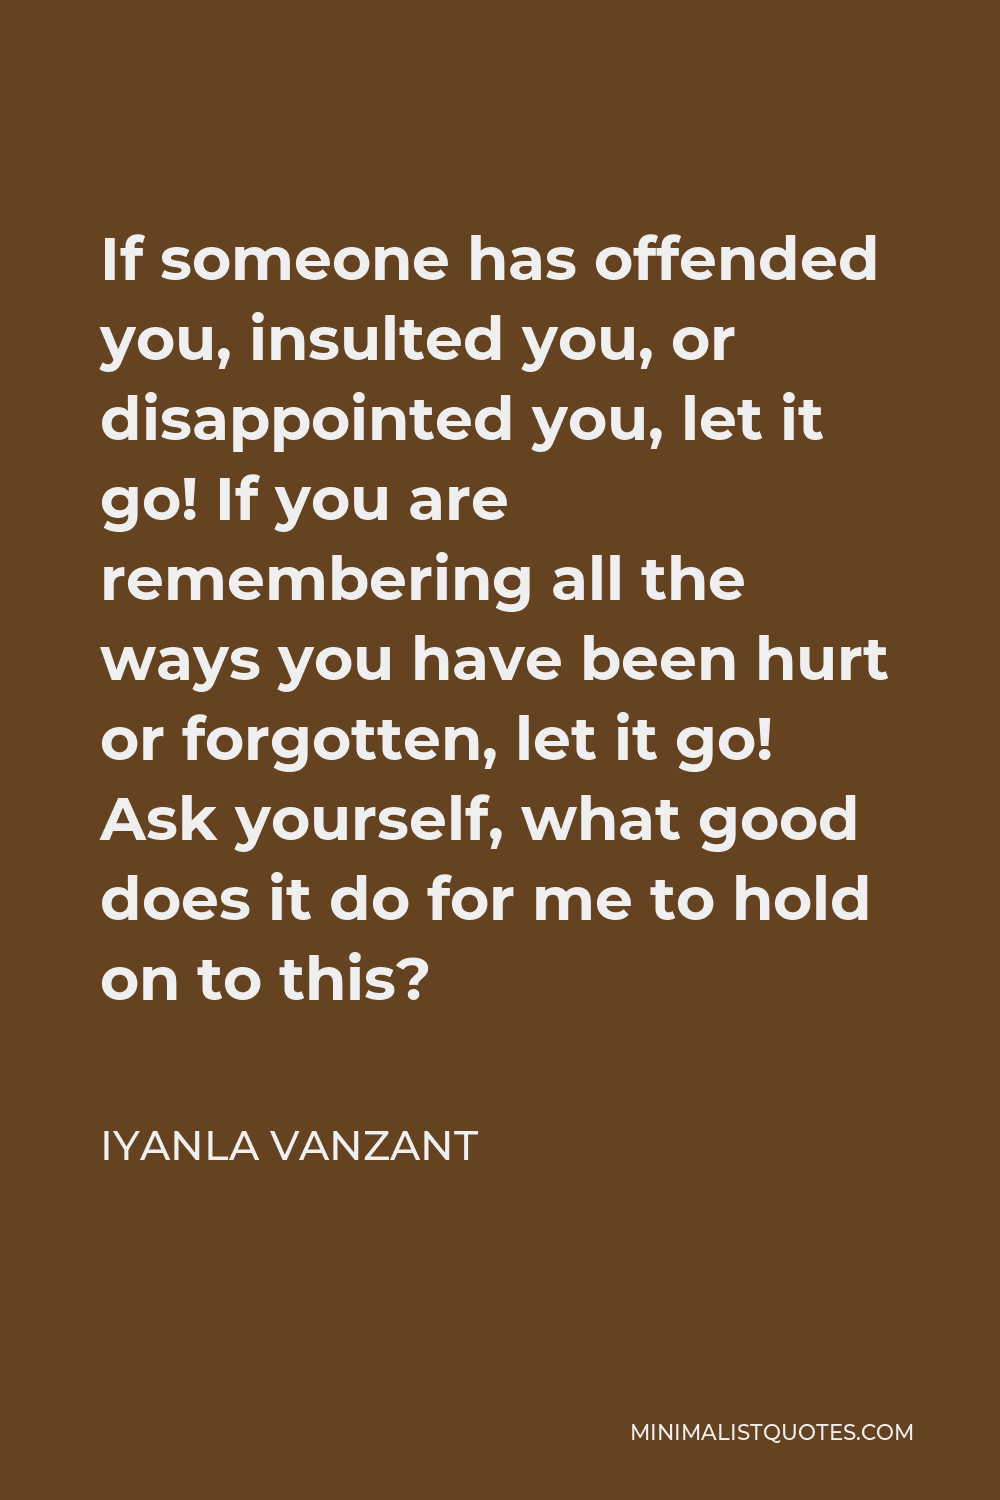 Iyanla Vanzant Quote - If someone has offended you, insulted you, or disappointed you, let it go! If you are remembering all the ways you have been hurt or forgotten, let it go! Ask yourself, what good does it do for me to hold on to this?